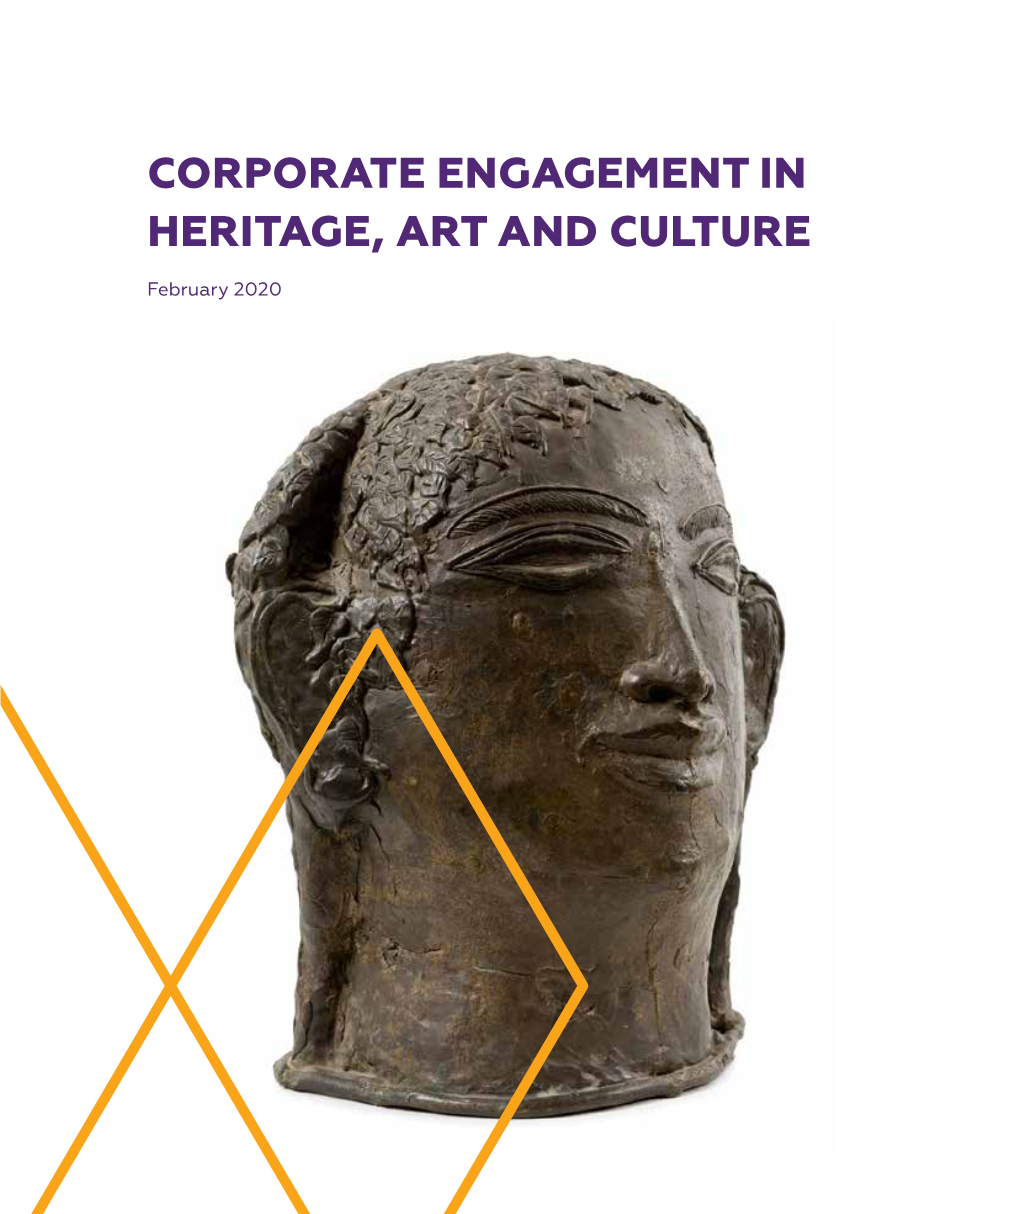 Corporate Engagement in Heritage, Art and Culture